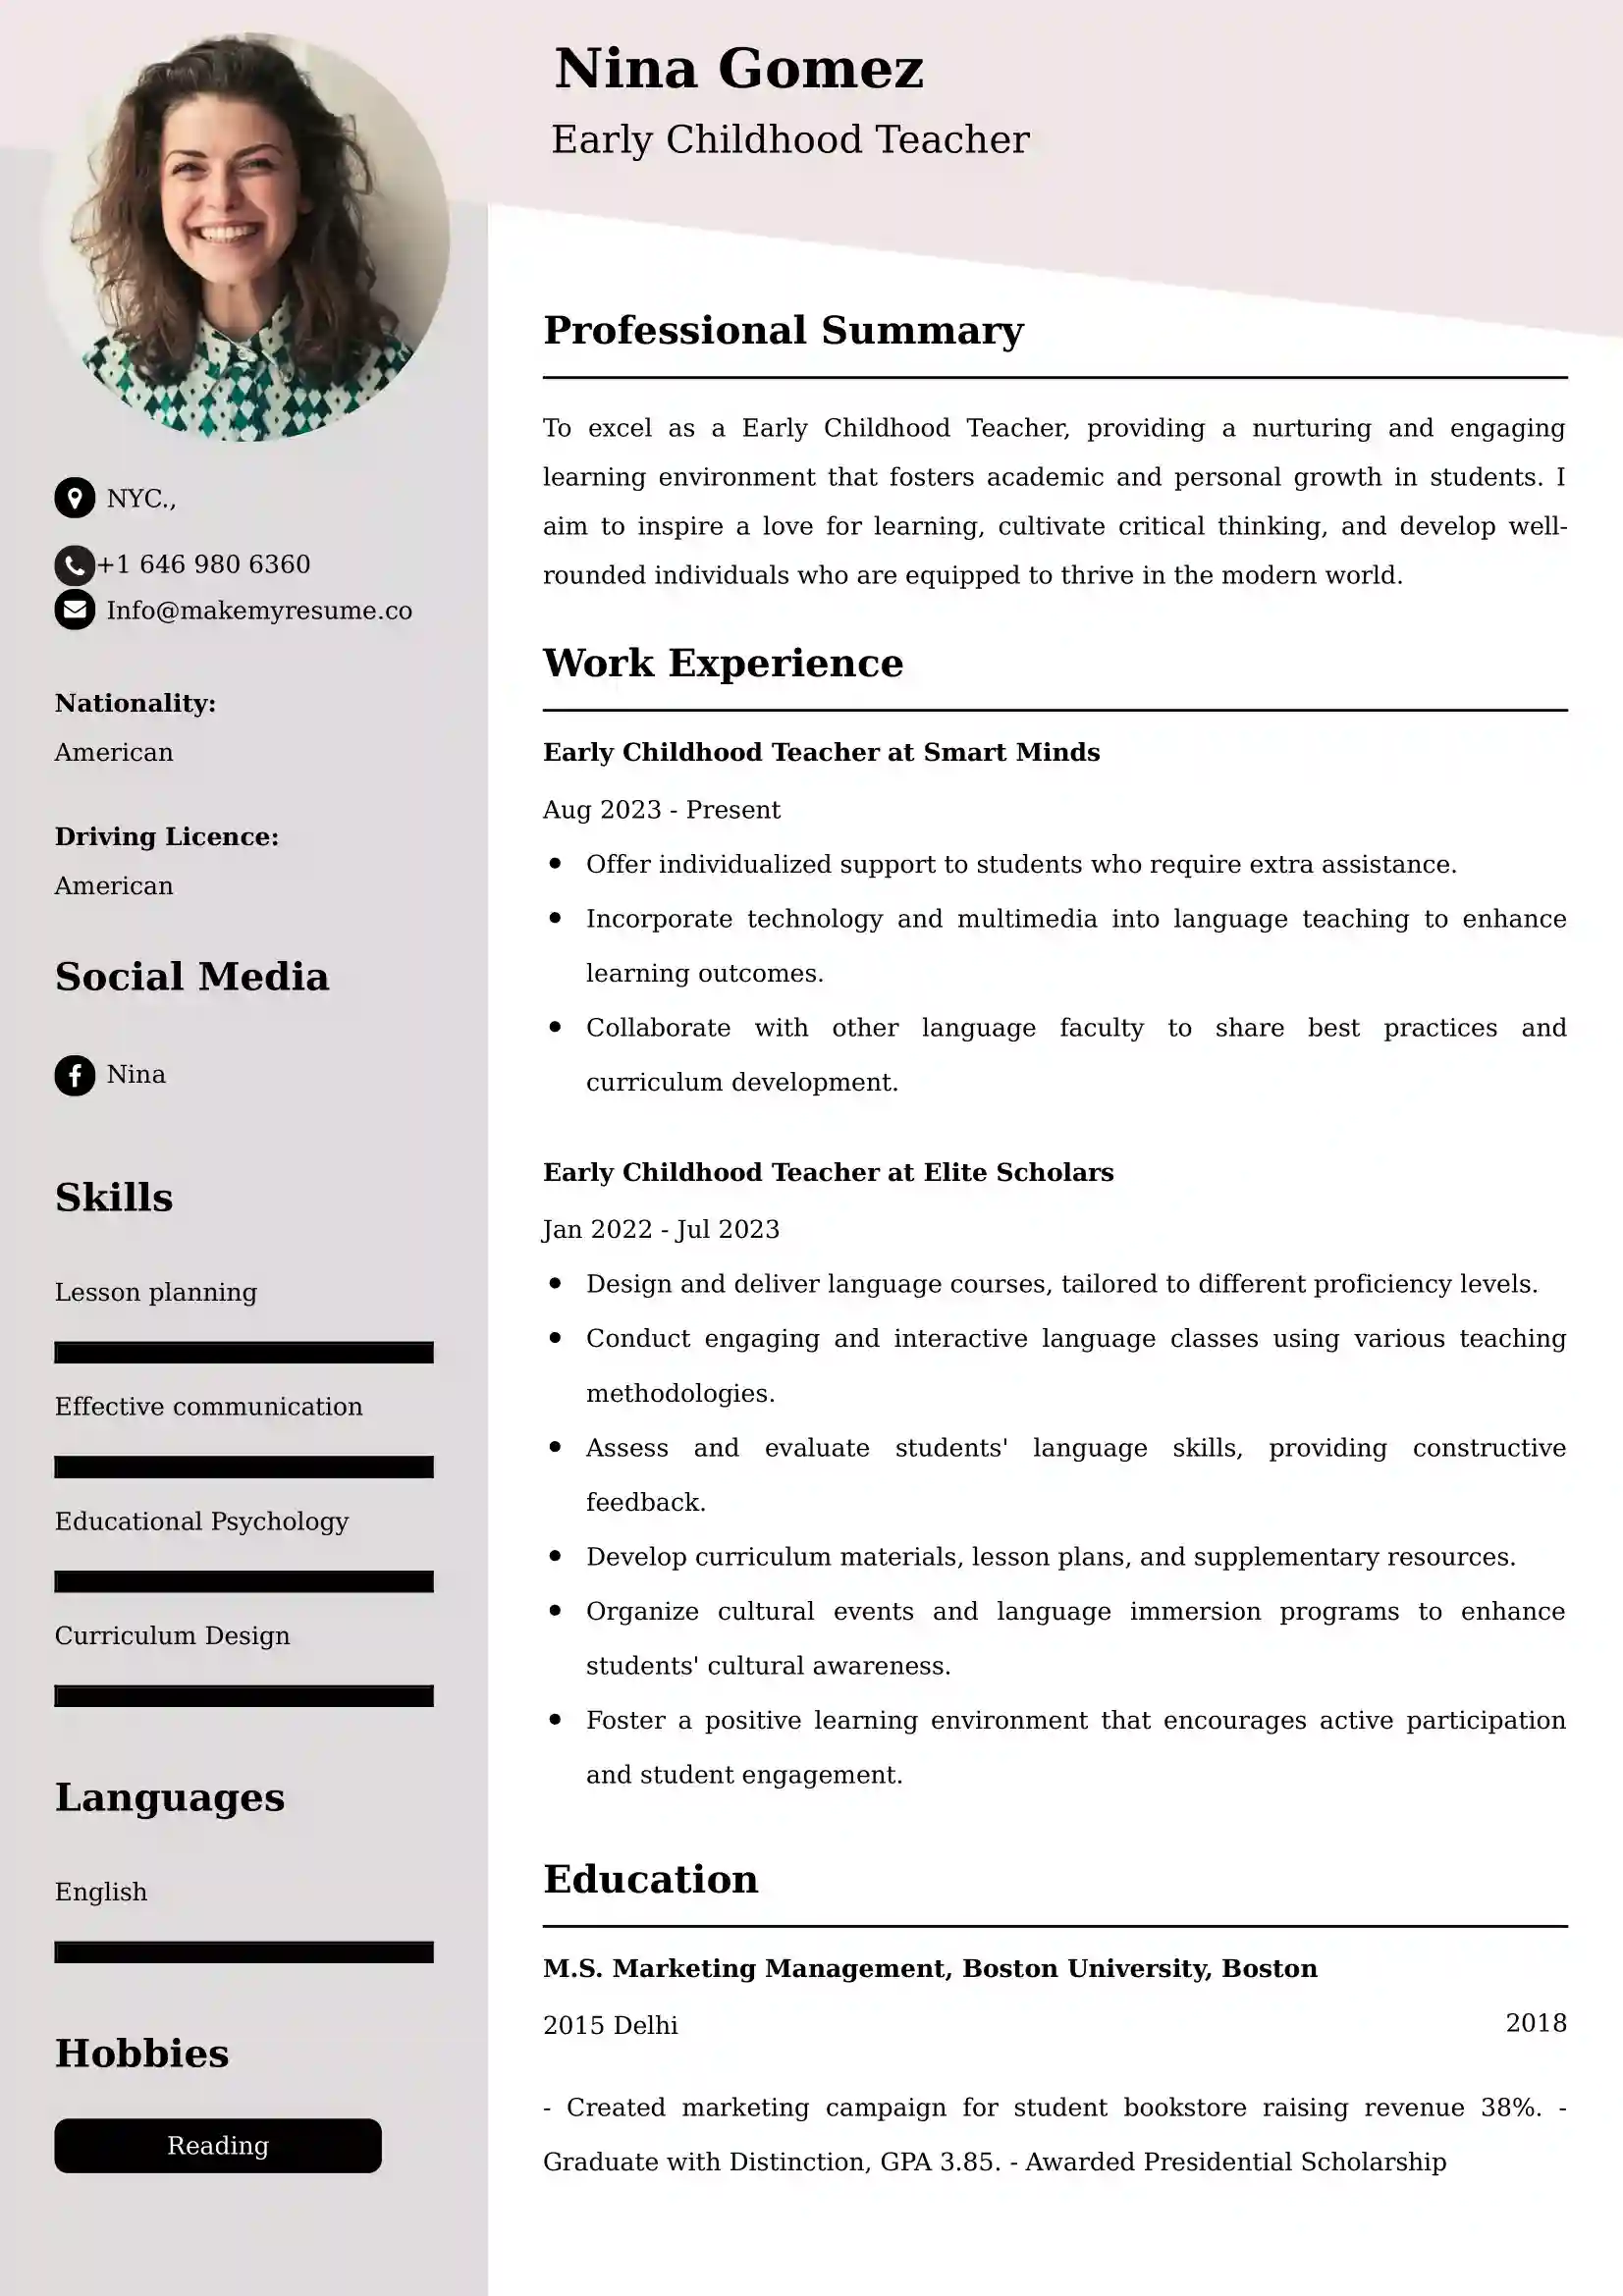 Early Childhood Teacher CV Examples - US Format